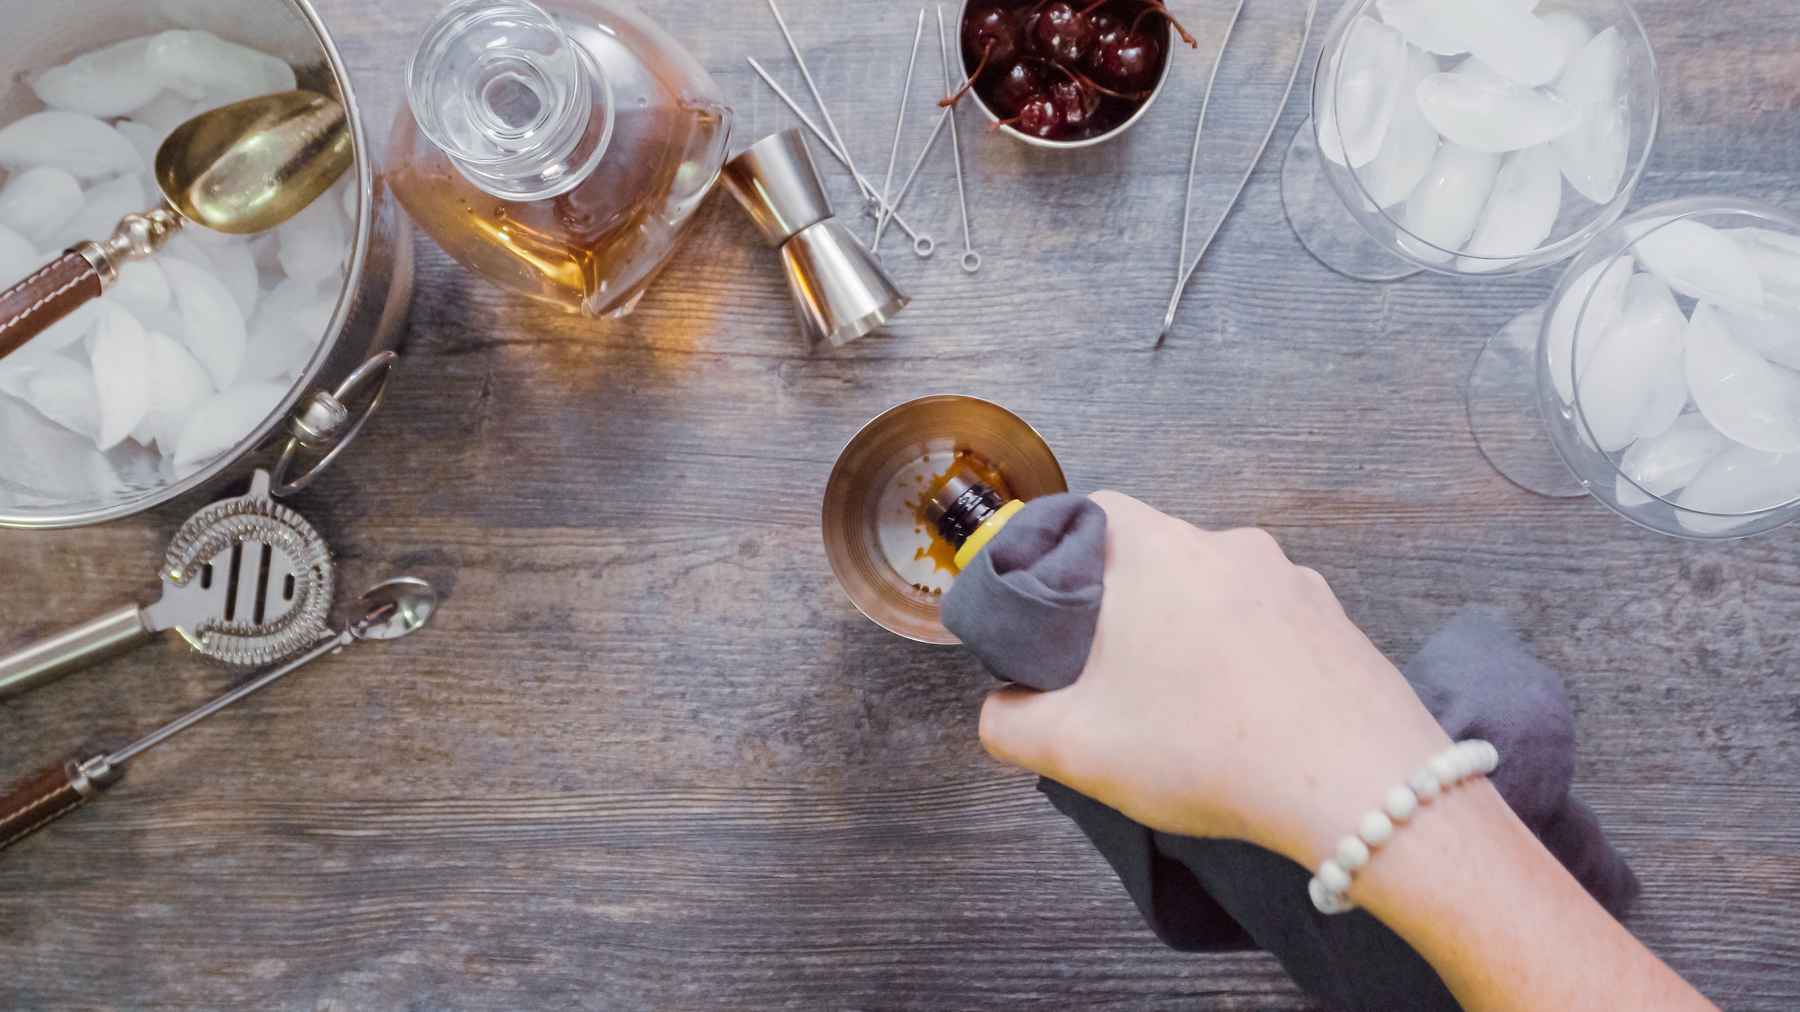 Overhead view of woman's hand adding bitters as she prepares a mixed drink.